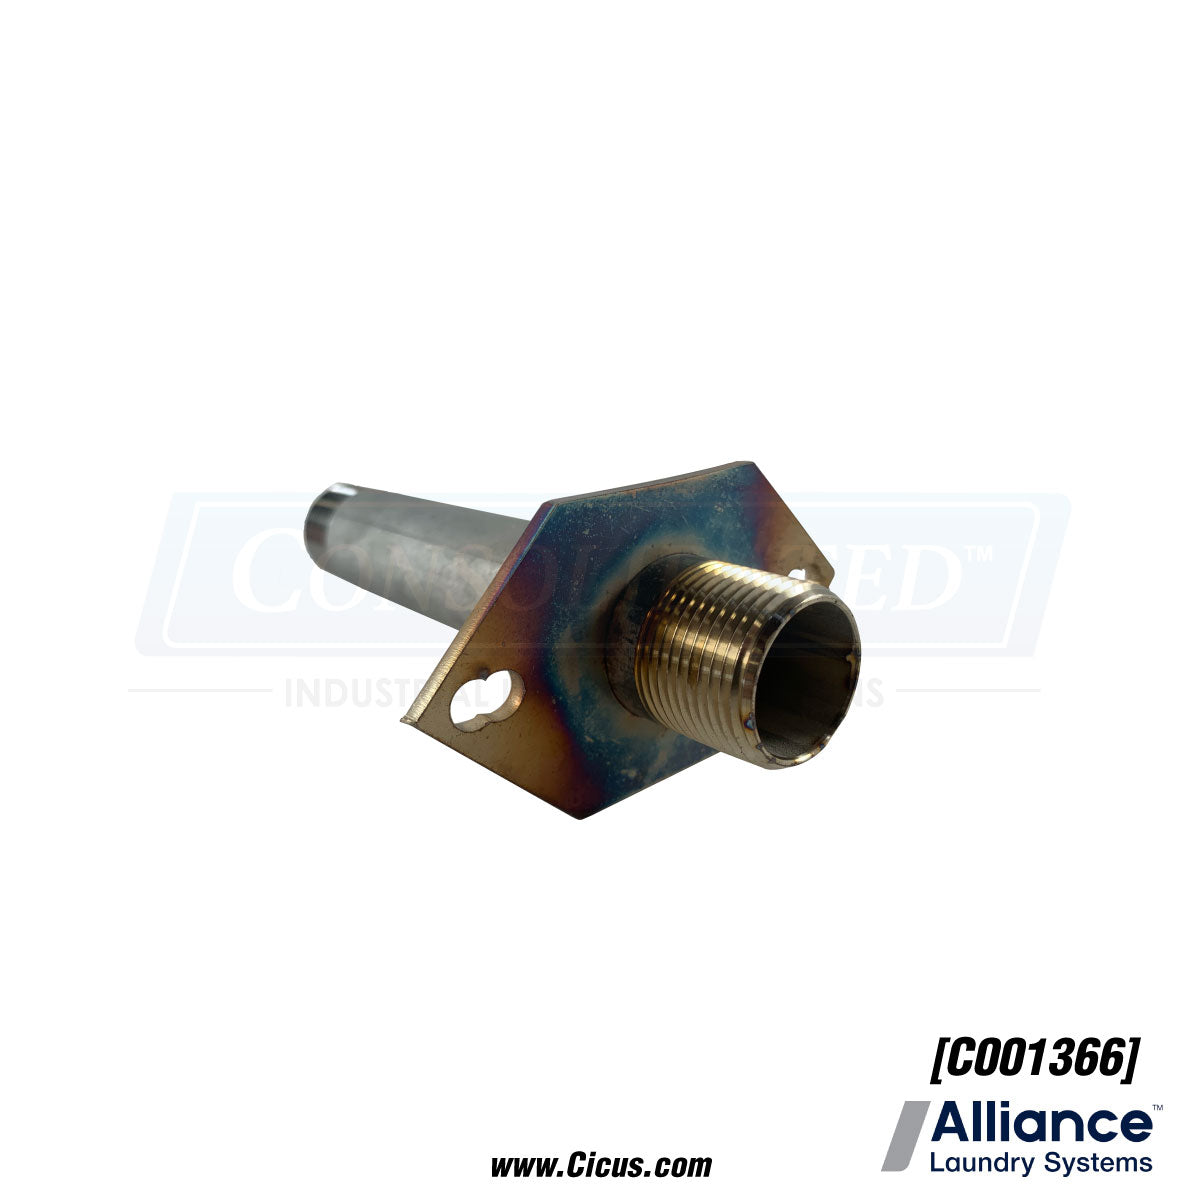 Alliance Laundry Systems Flange & Nipple 3/4 Plumbing Assembly [C001366]